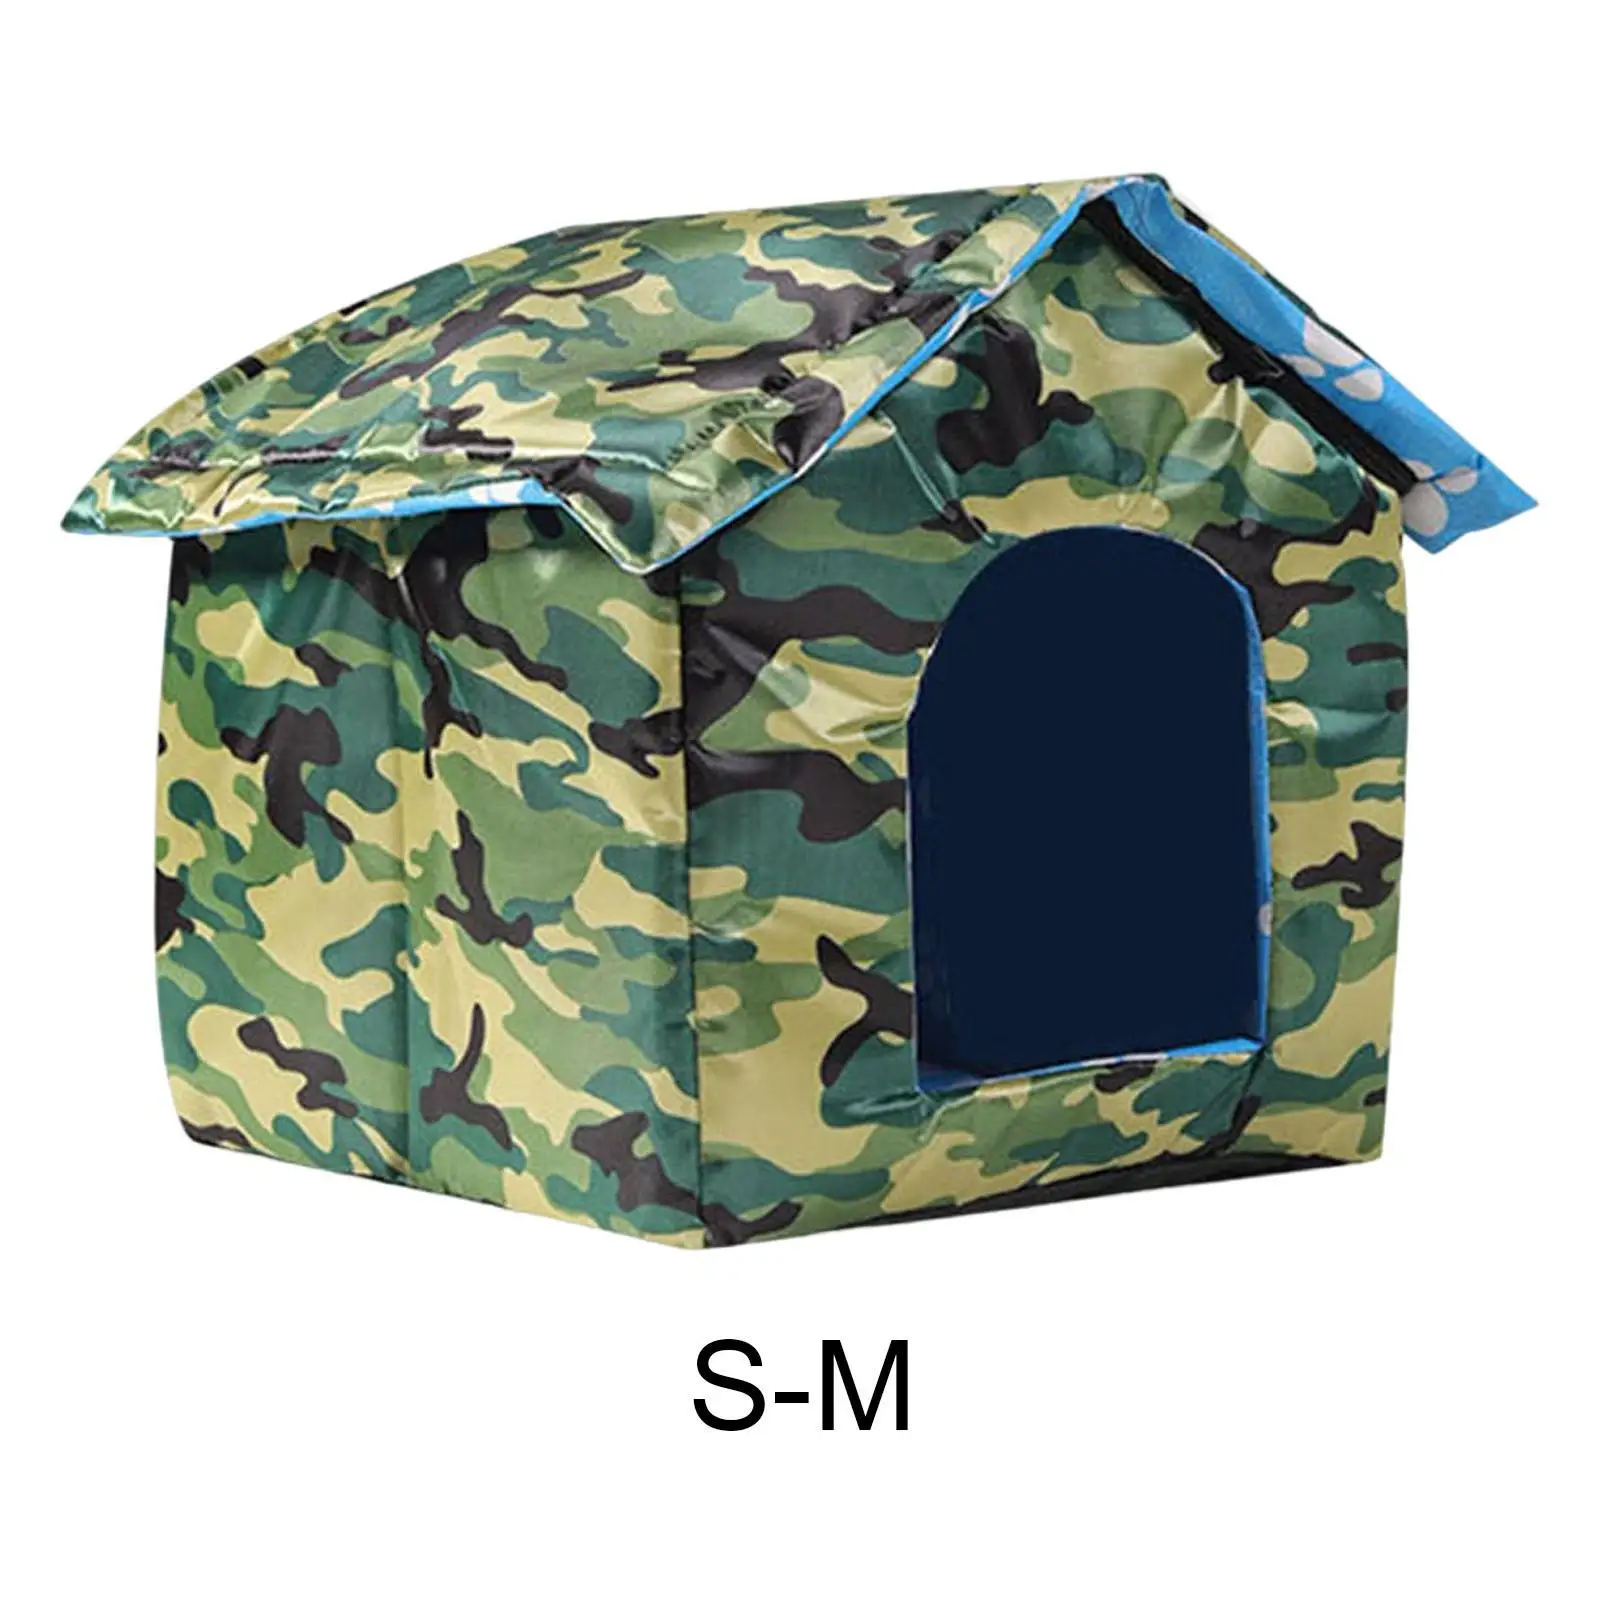 Outdoor Feral Dog House Pet House Oxford Cloth Indoor Outdoor Winter Nest Thickened Weatherproof Pet Supplies Stray Cats Shelter